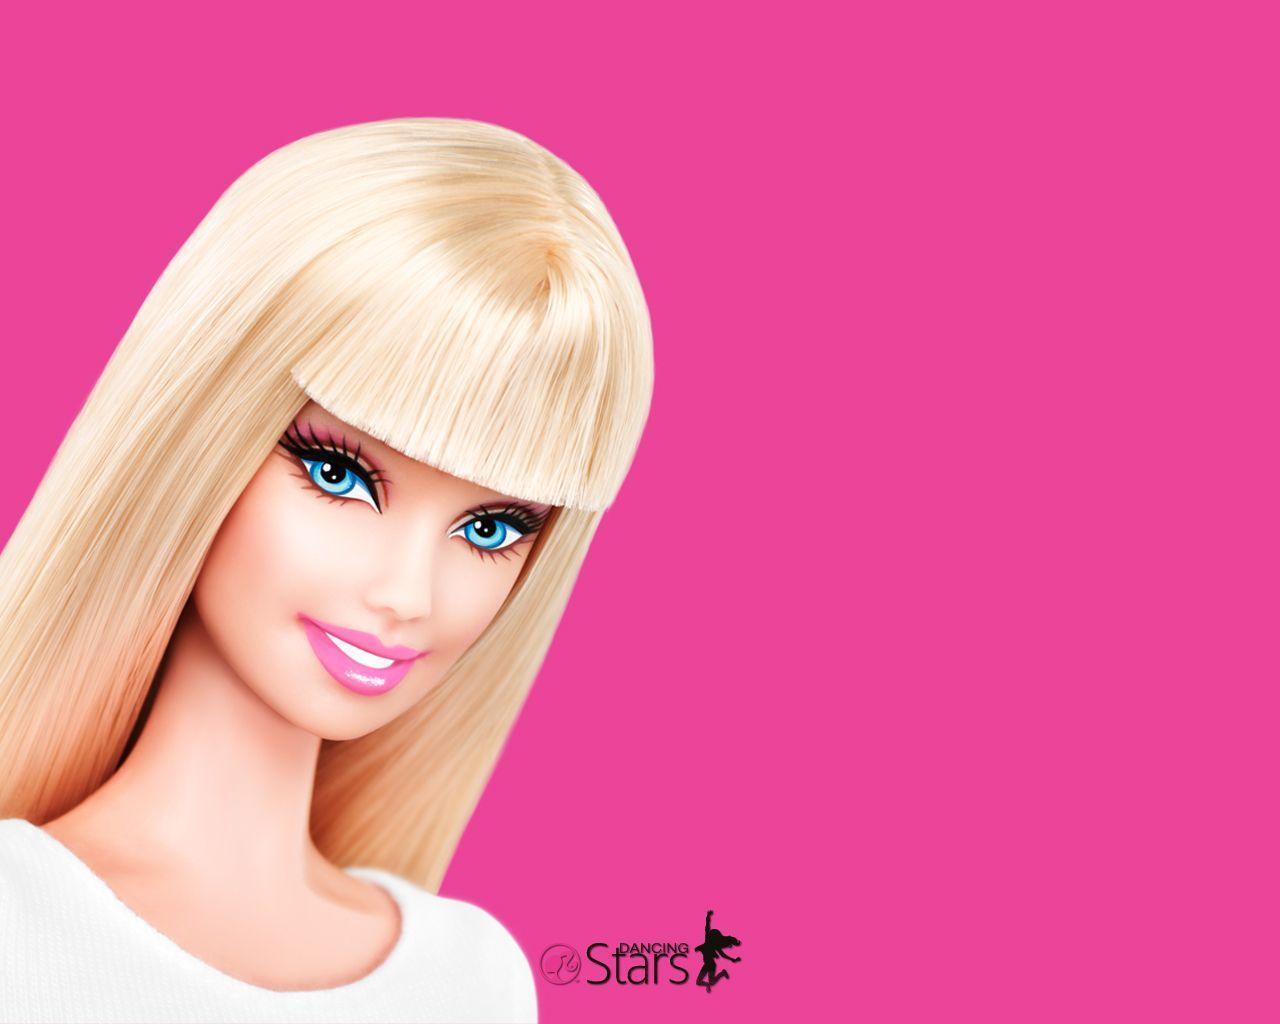 Barbie Wallpaper Hd 8. Funny Picture Photo, Funny Jokes, Funny